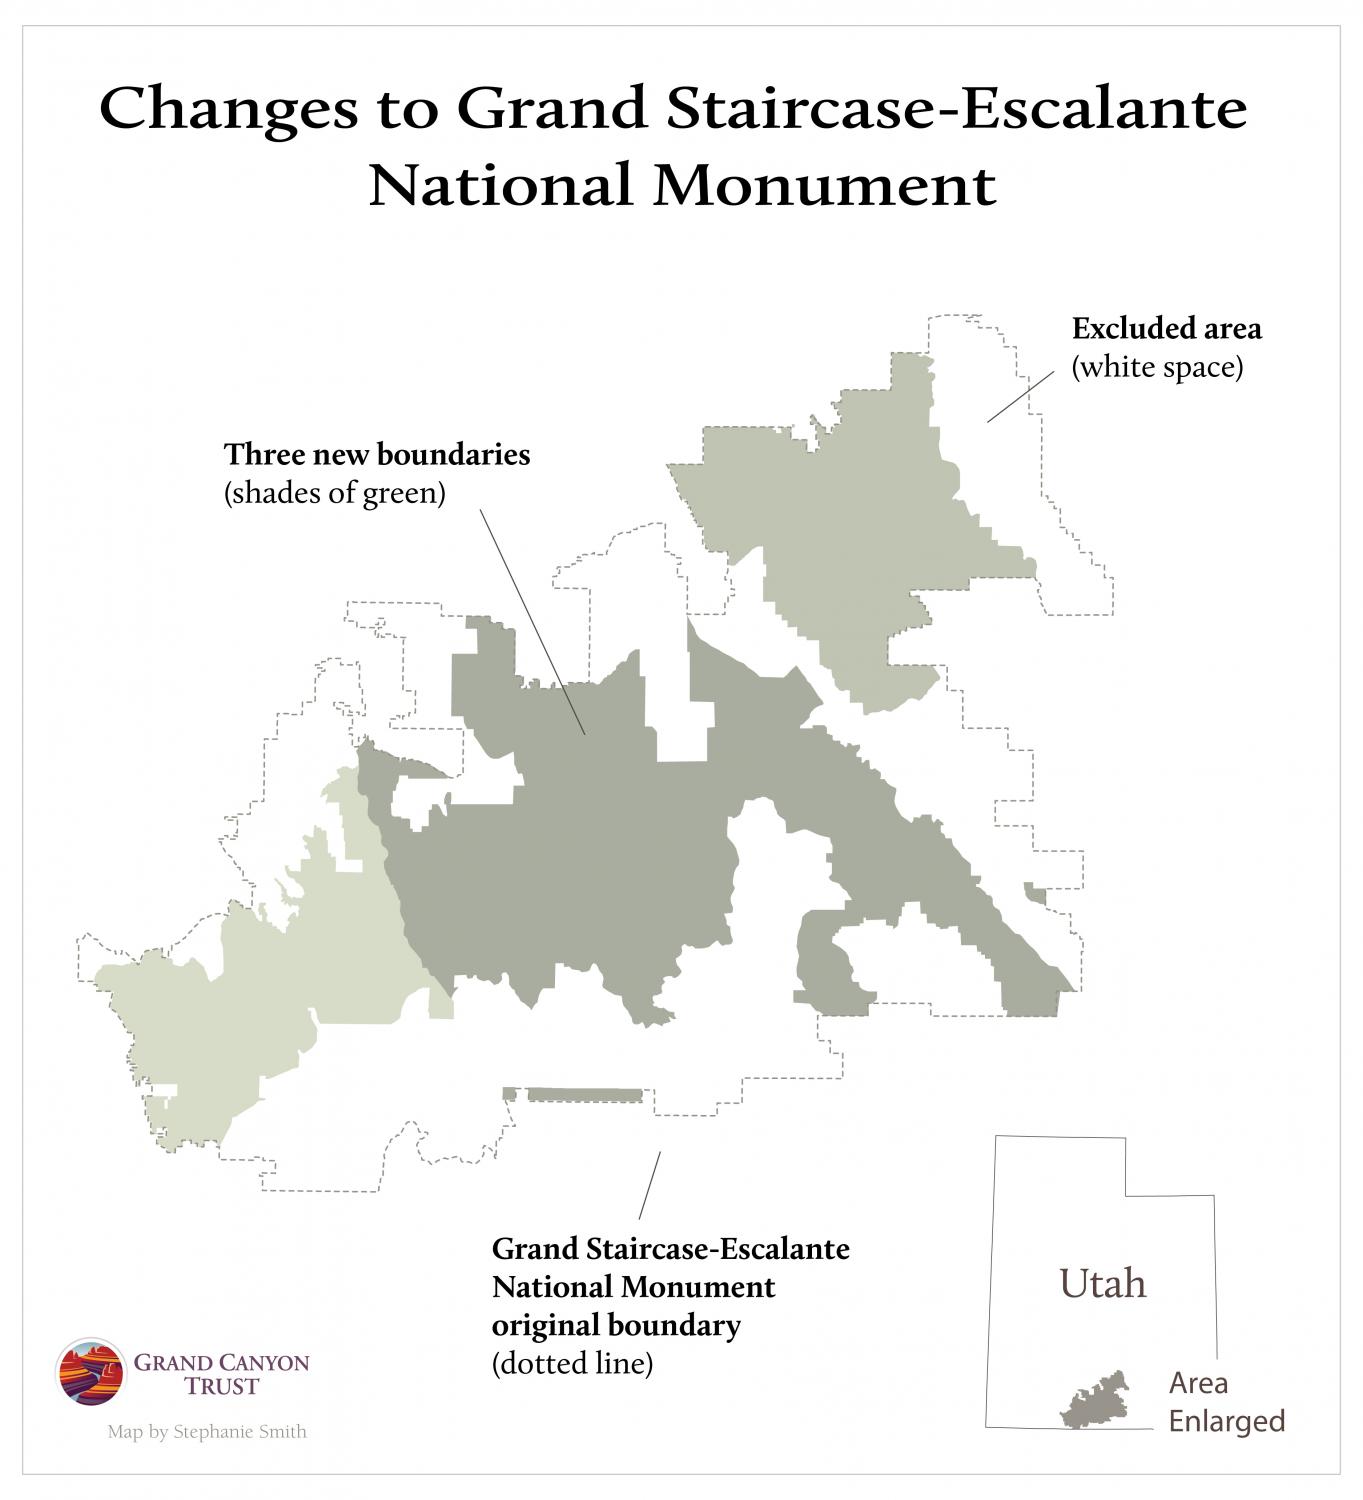 Map showing the excluded areas from Grand Staircase-Escalante National Monument.